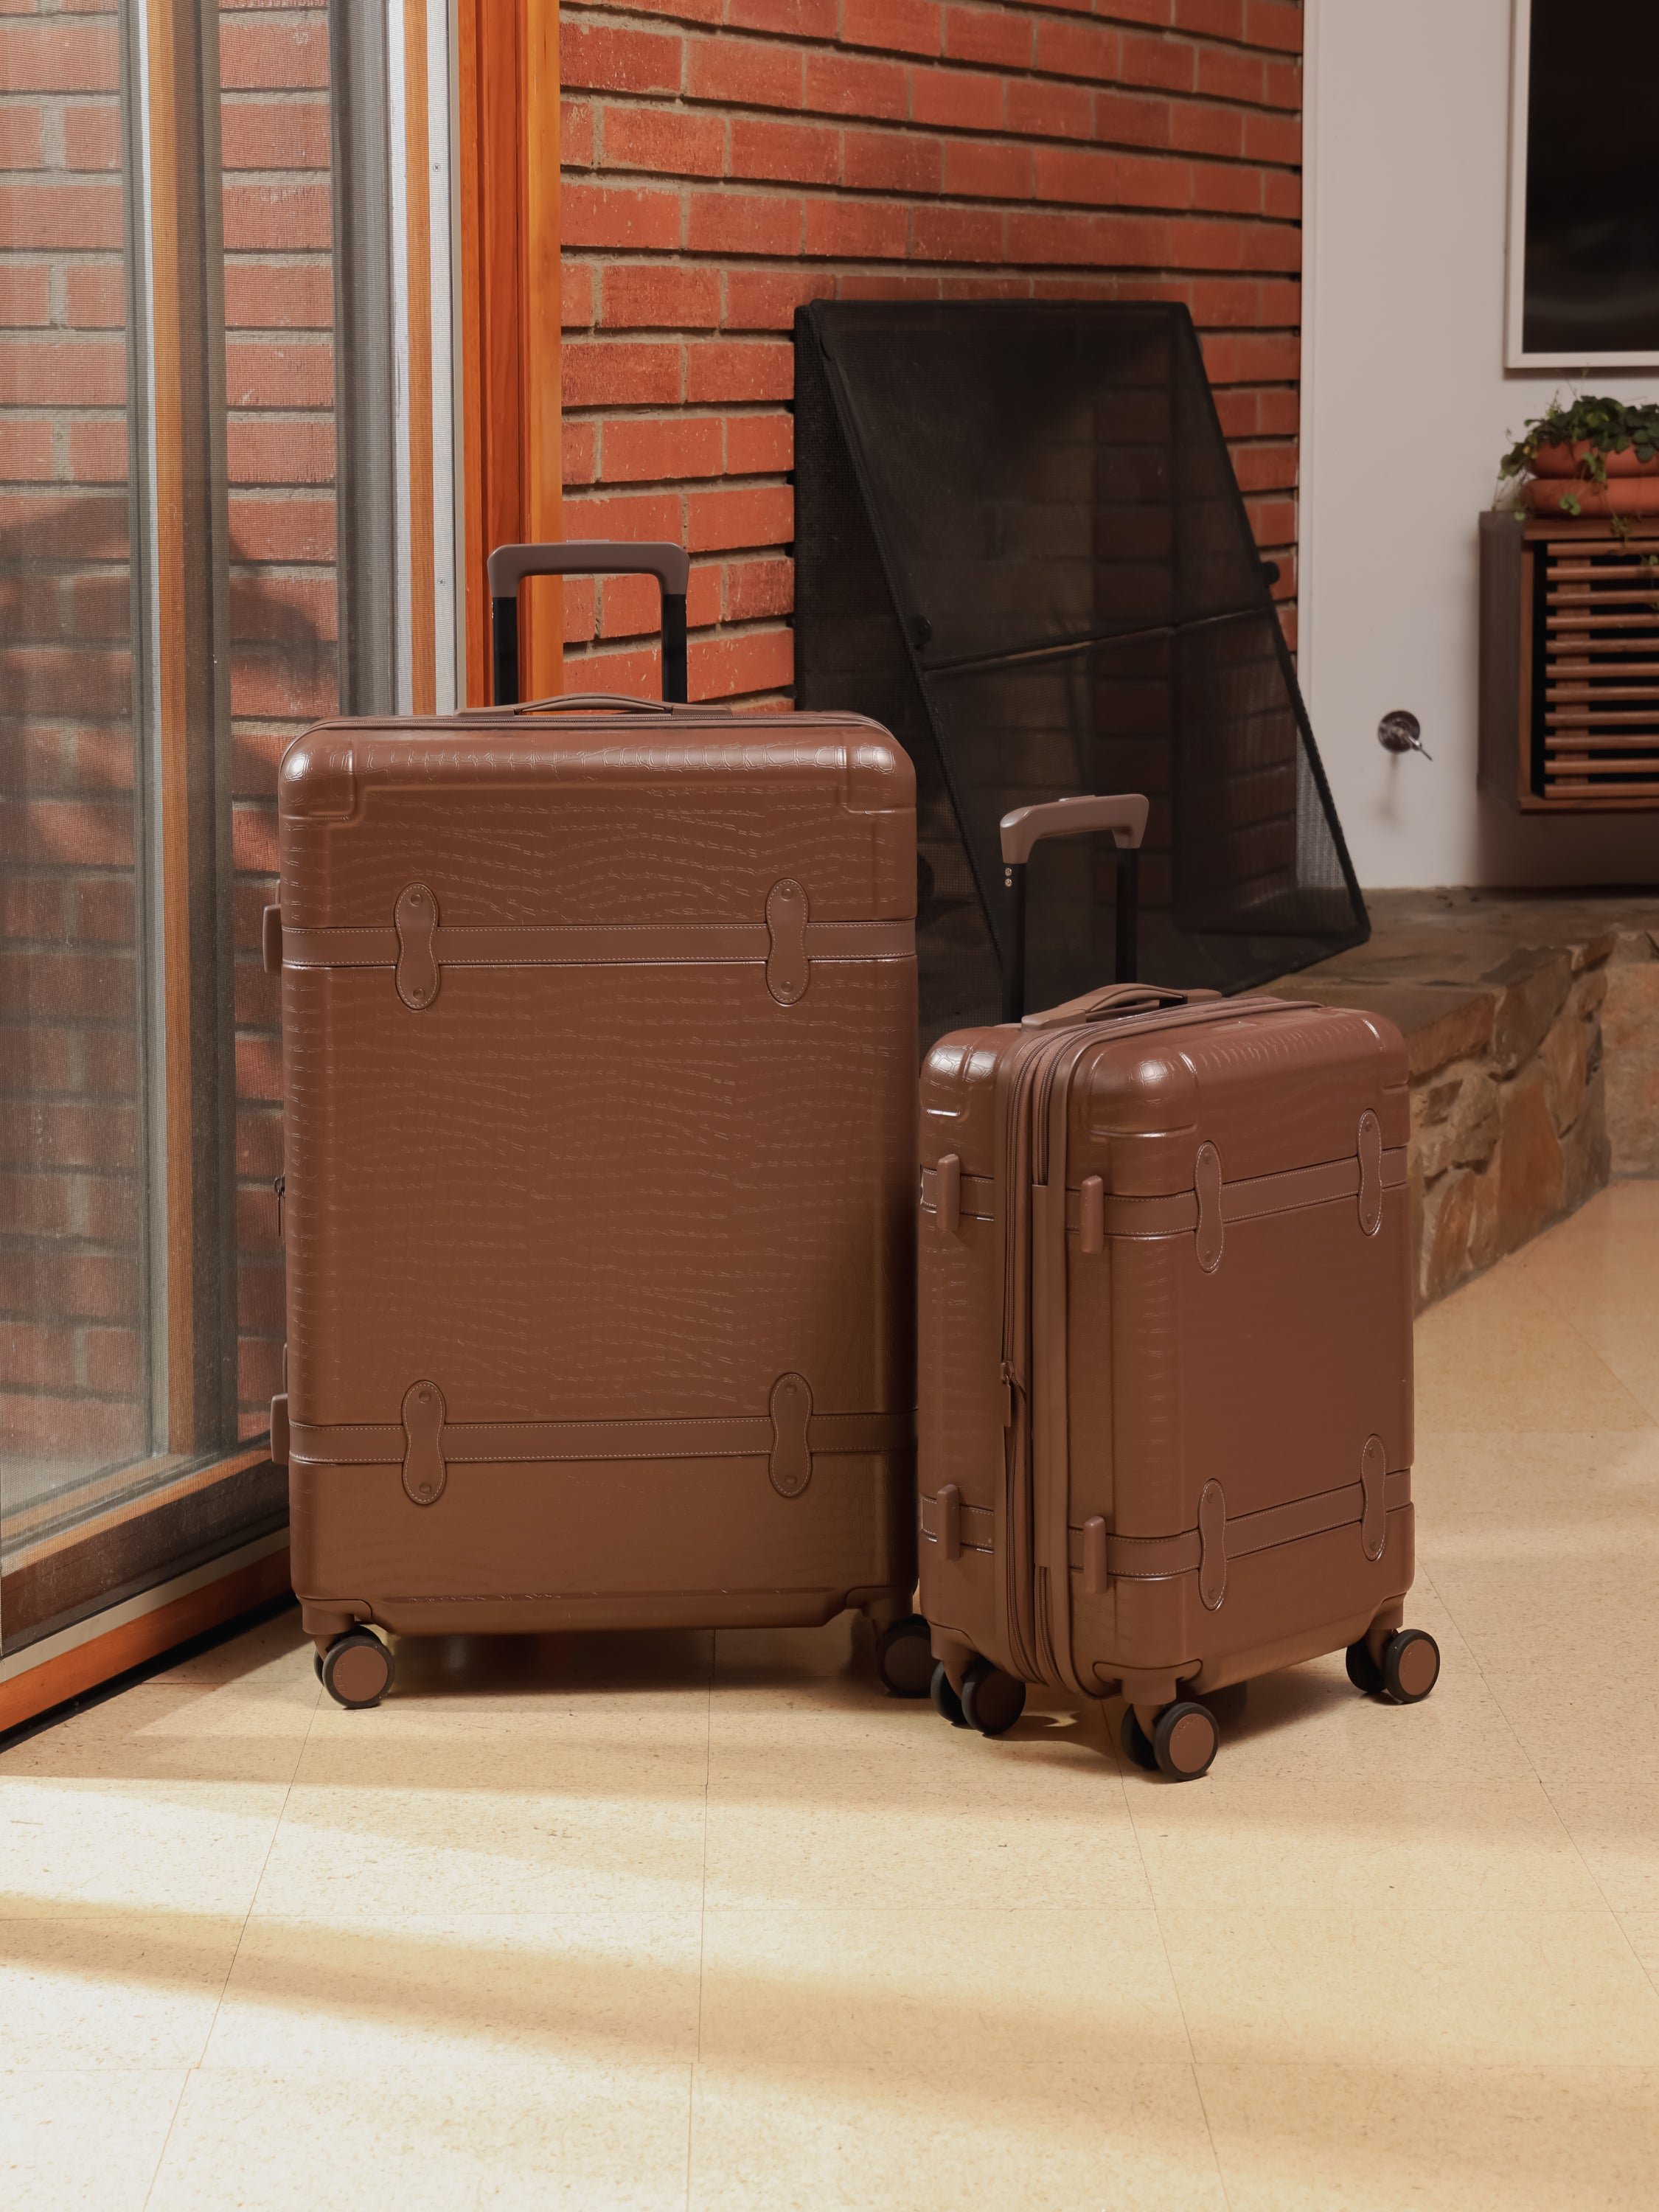 CALPAK TRNK 2 piece luggage set with hard shell exterior and 360 spinner wheels in espresso